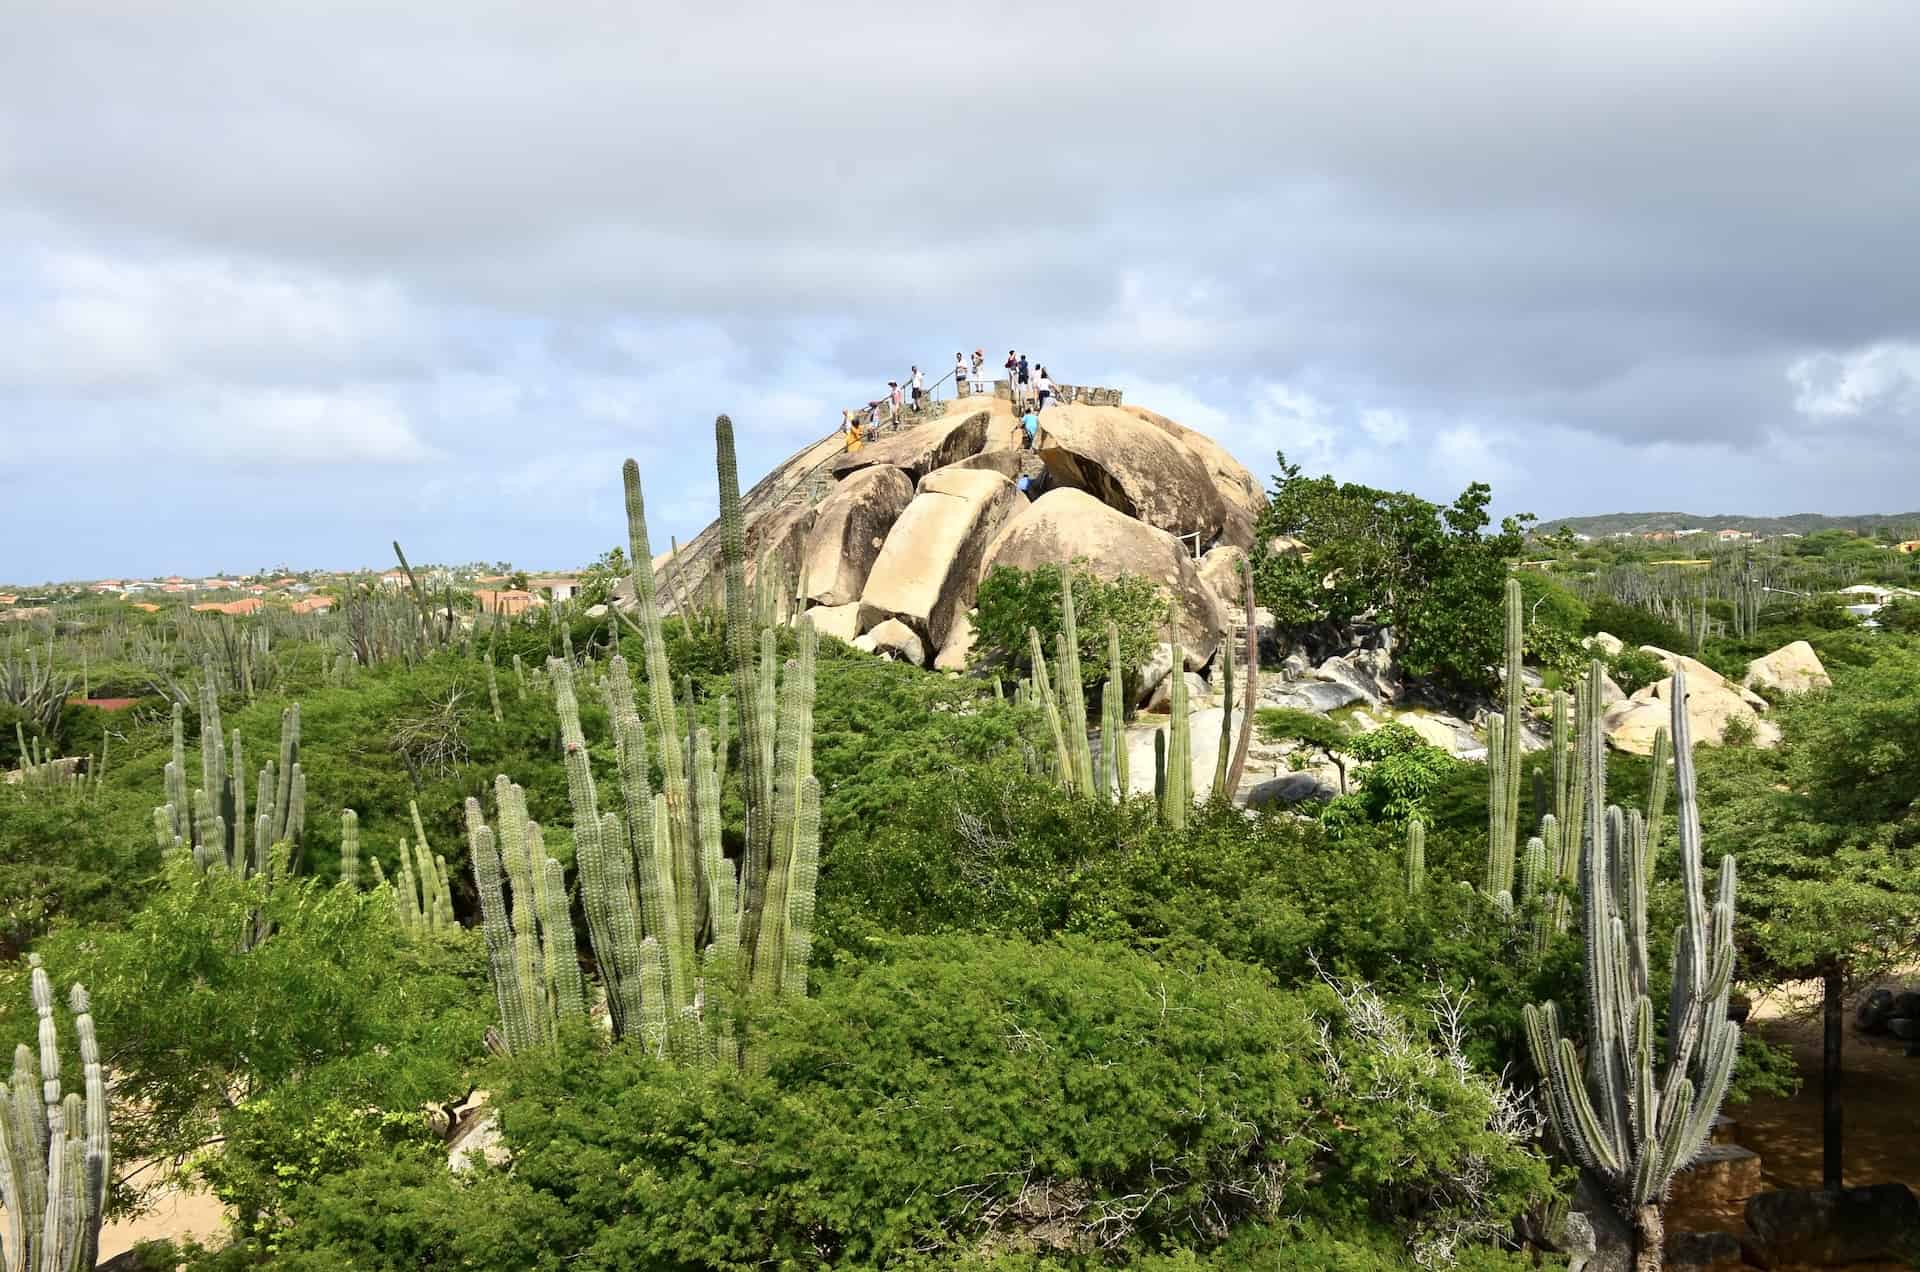 Looking at the largest rock from the second largest rock at the Casibari Rock Formations in Paradera, Aruba